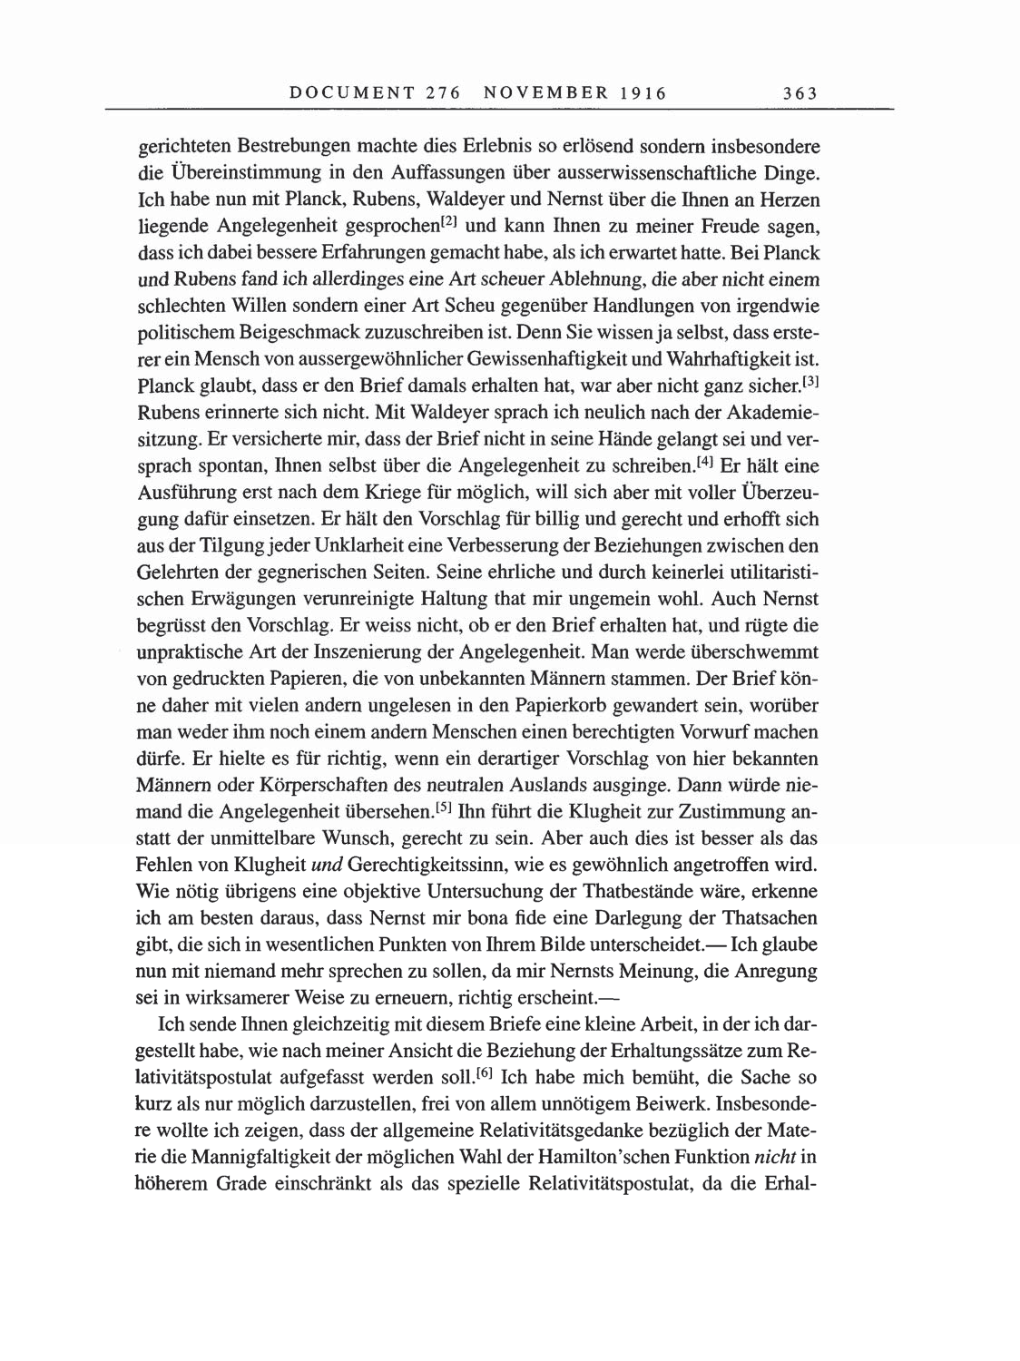 Volume 8, Part A: The Berlin Years: Correspondence 1914-1917 page 363